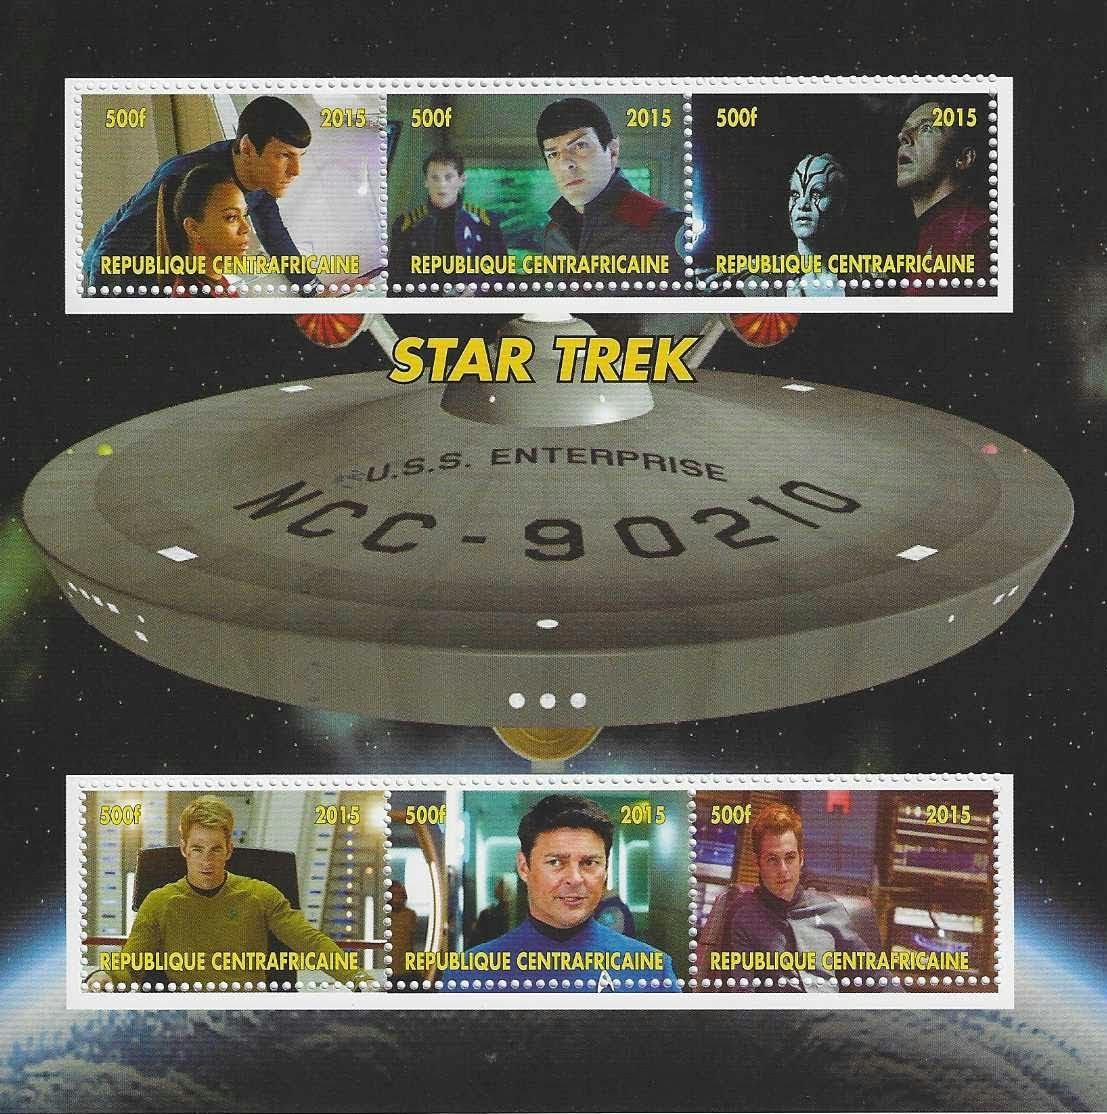 Star Trek stamps from Central African Republic